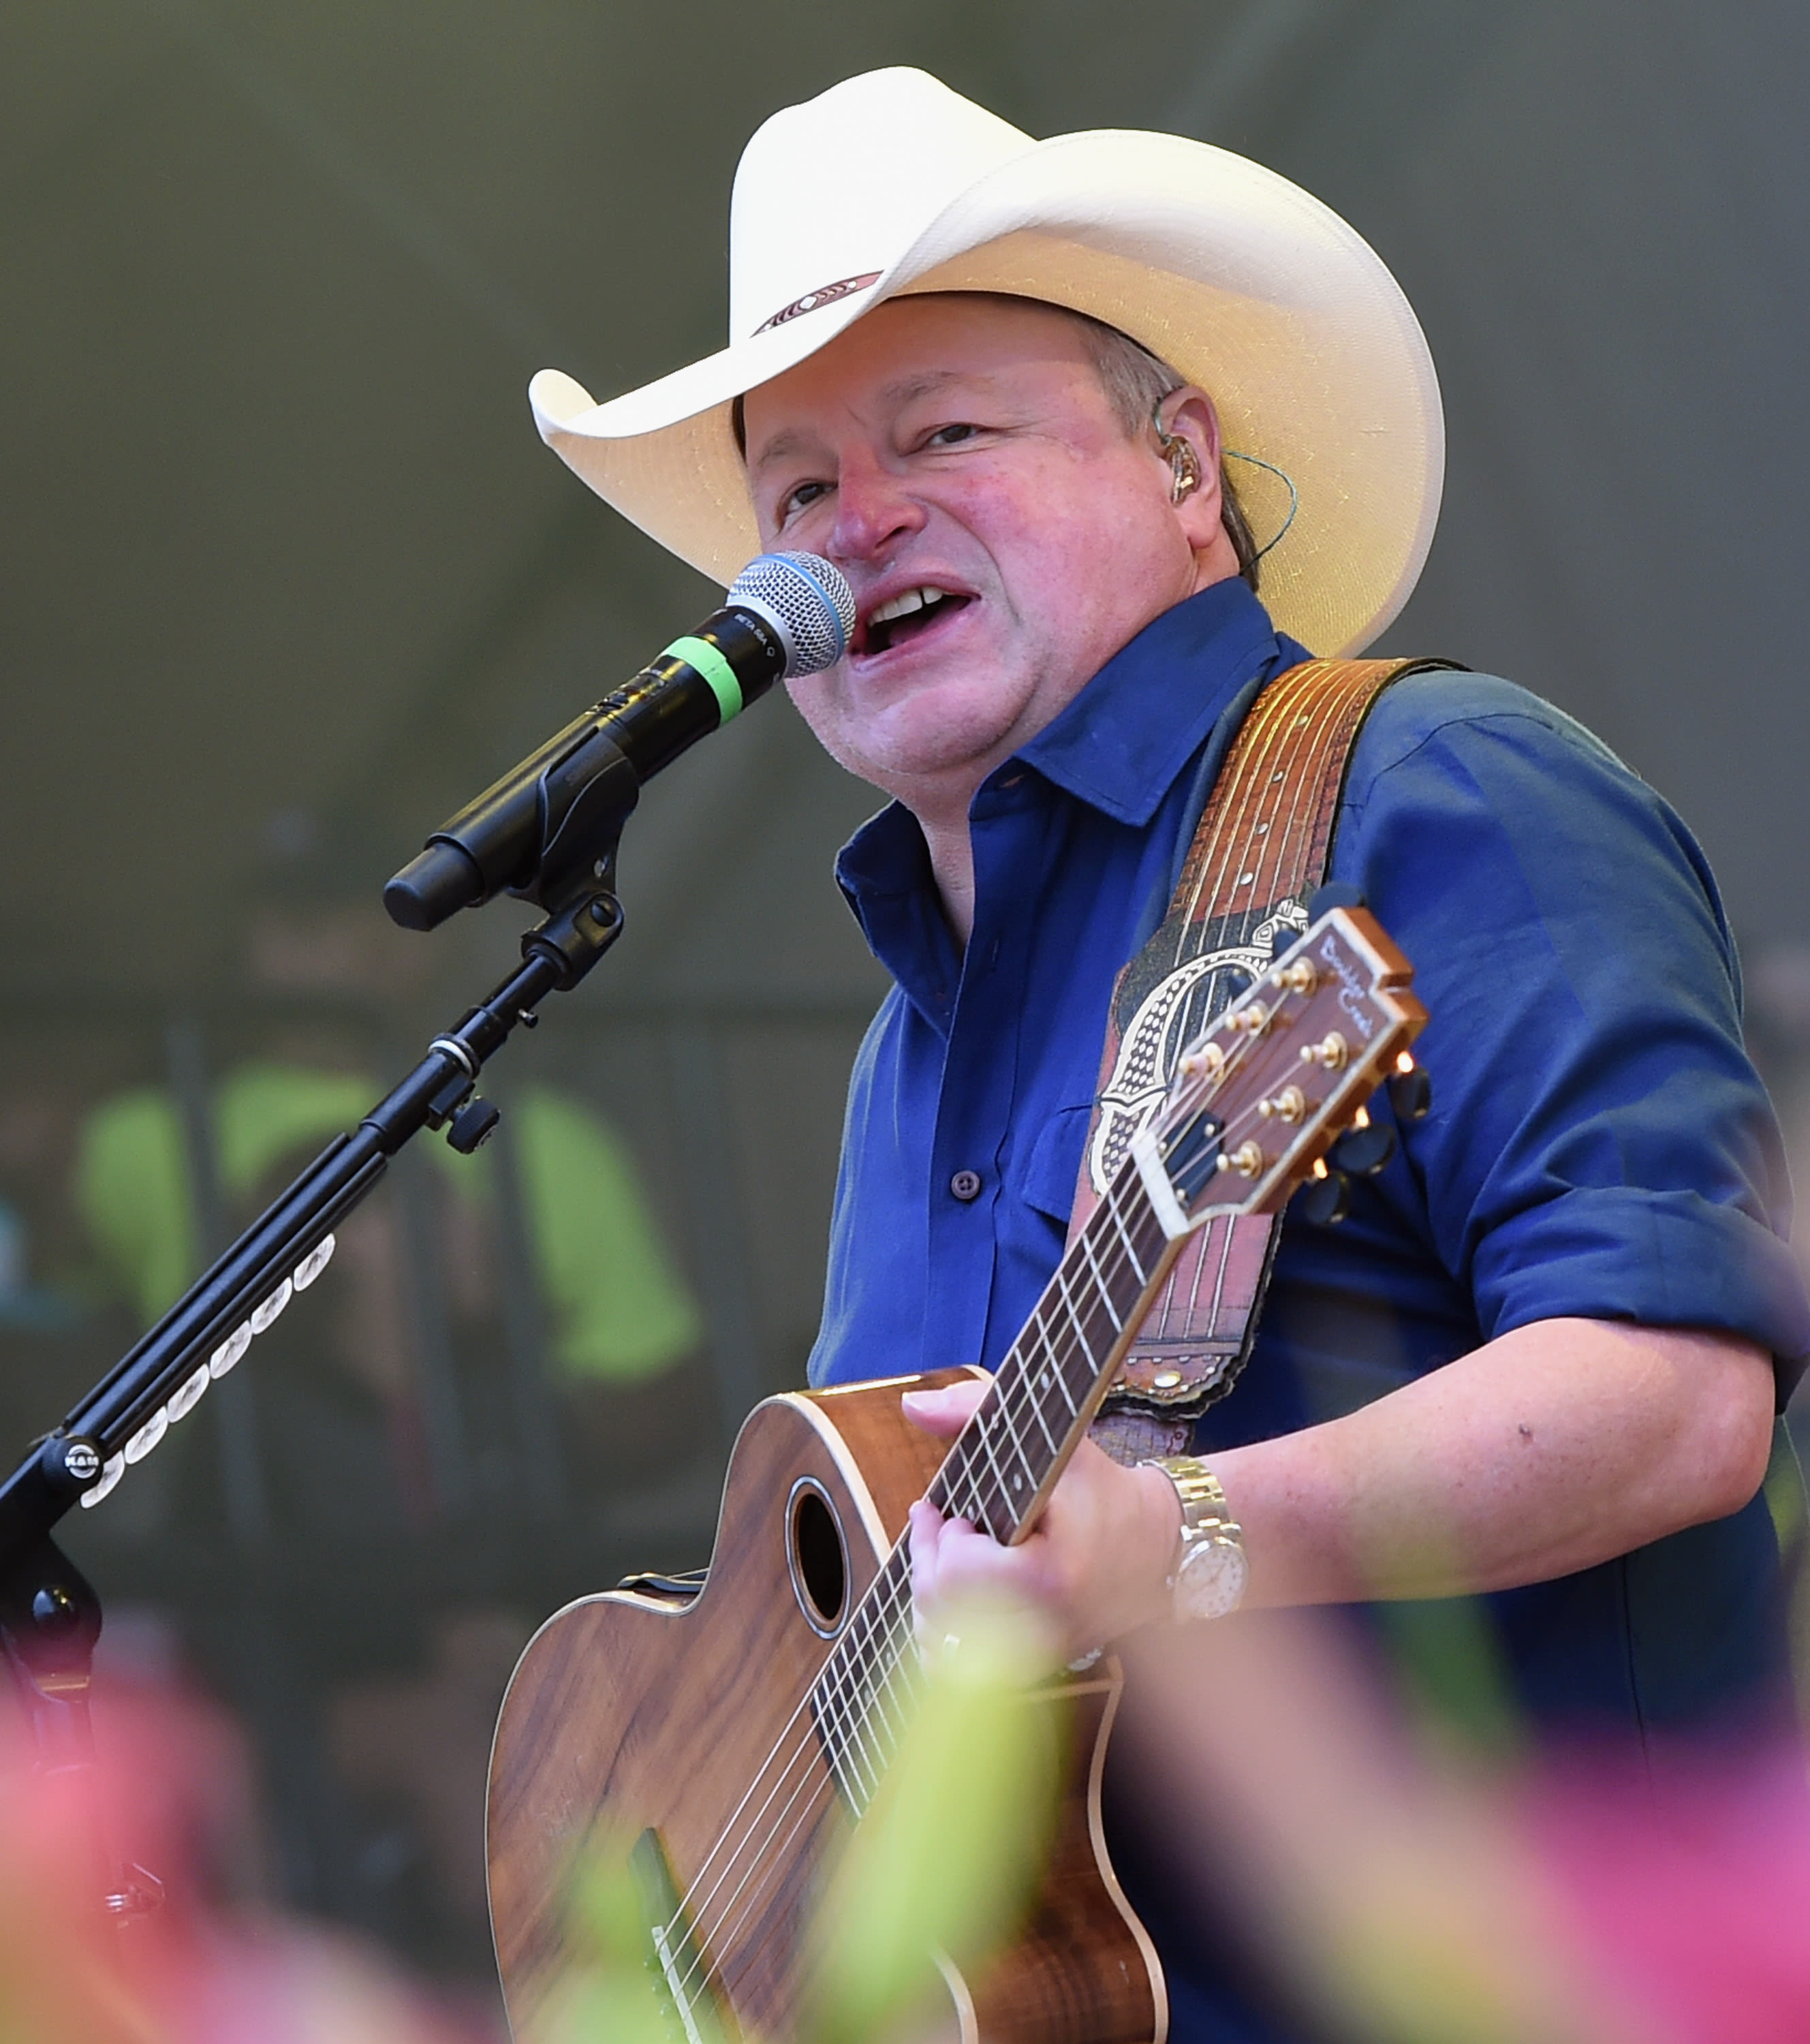 Mark Chesnutt’s Health in ‘Serious Decline’: ‘He’ll Be Devastated If He Can’t Perform’